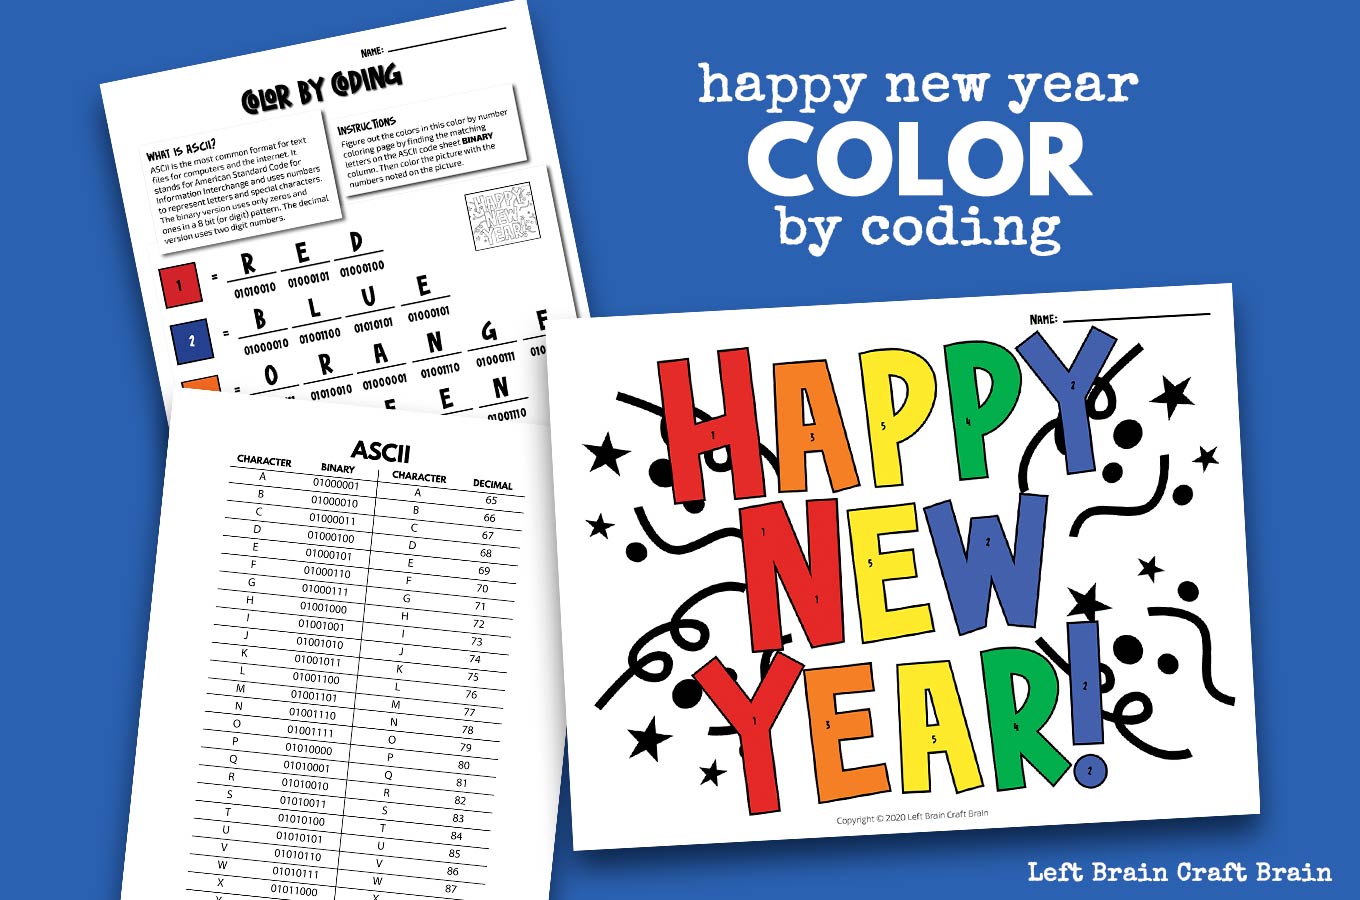 Happy-New-Year-Color-by-Coding-Mockup-680x450